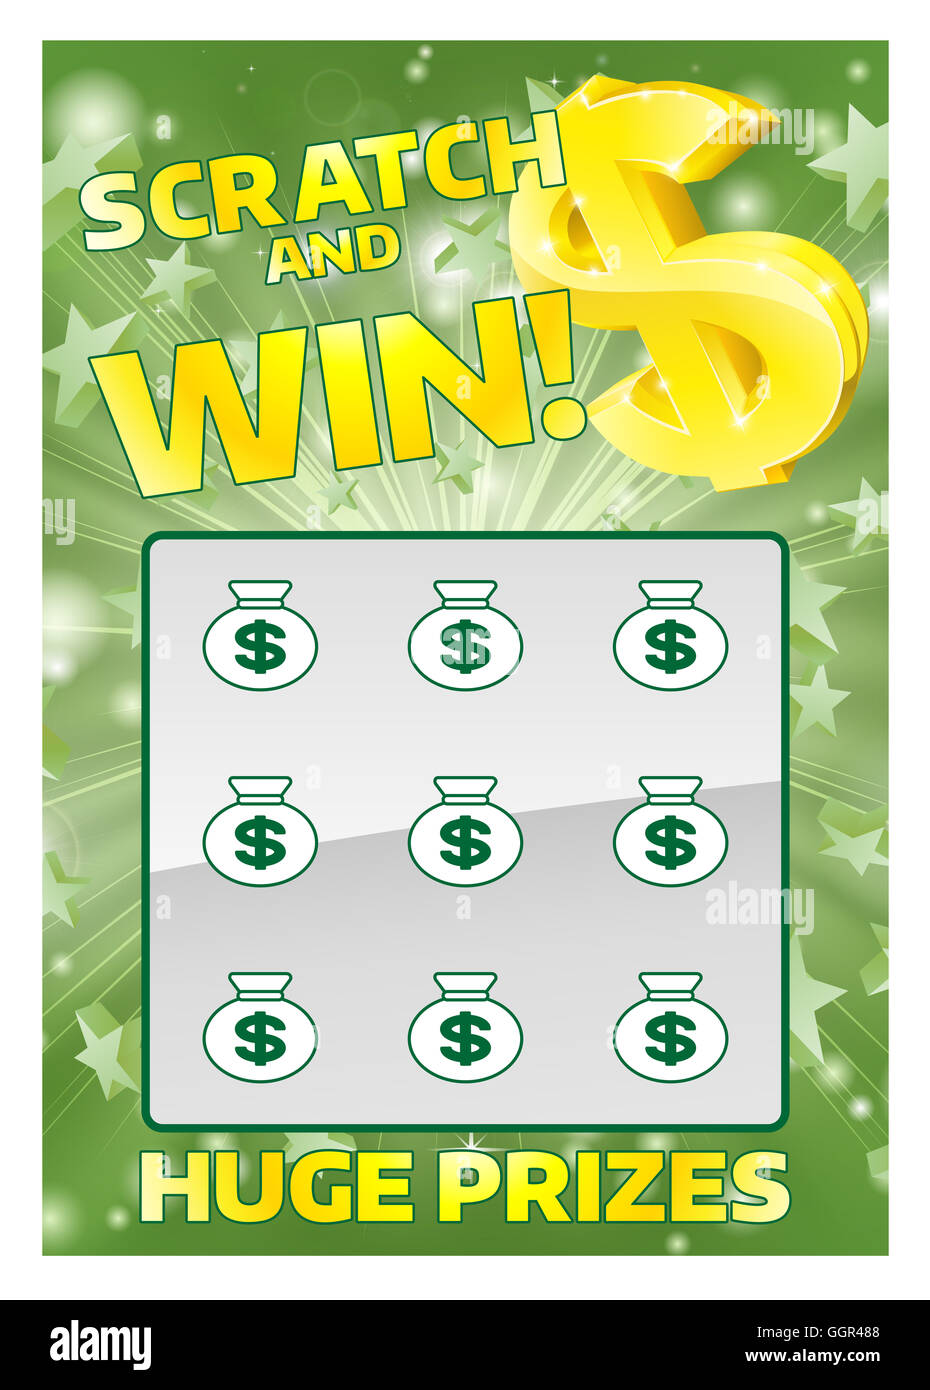 An illustration of a lottery scratchcard instant scratch and win Stock Photo